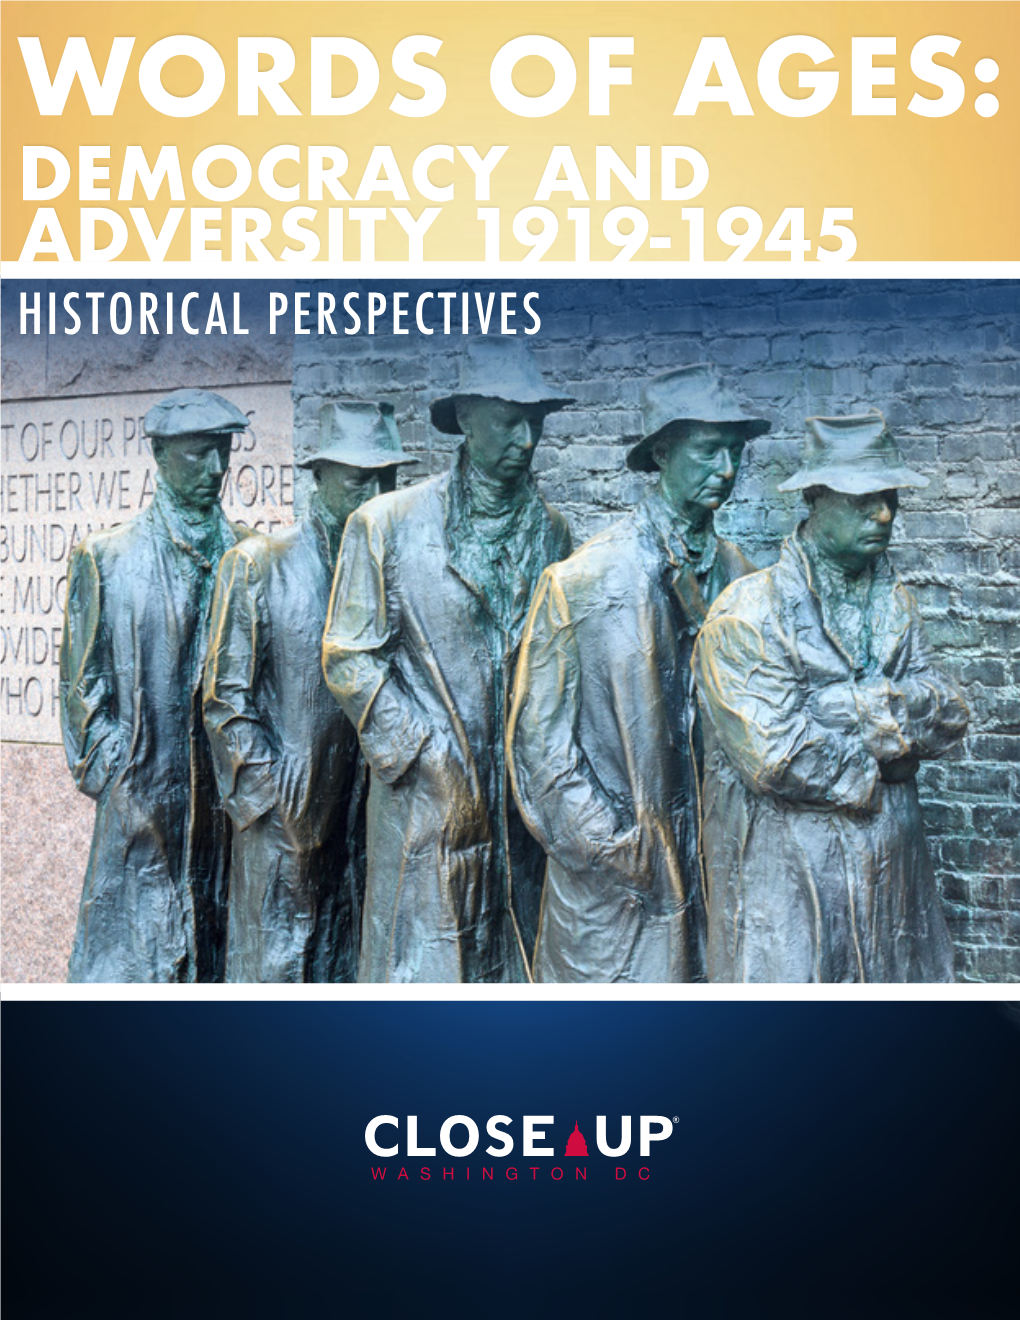 Words of Ages: Democracy and Adversity 1919-1945 Historical Perspectives